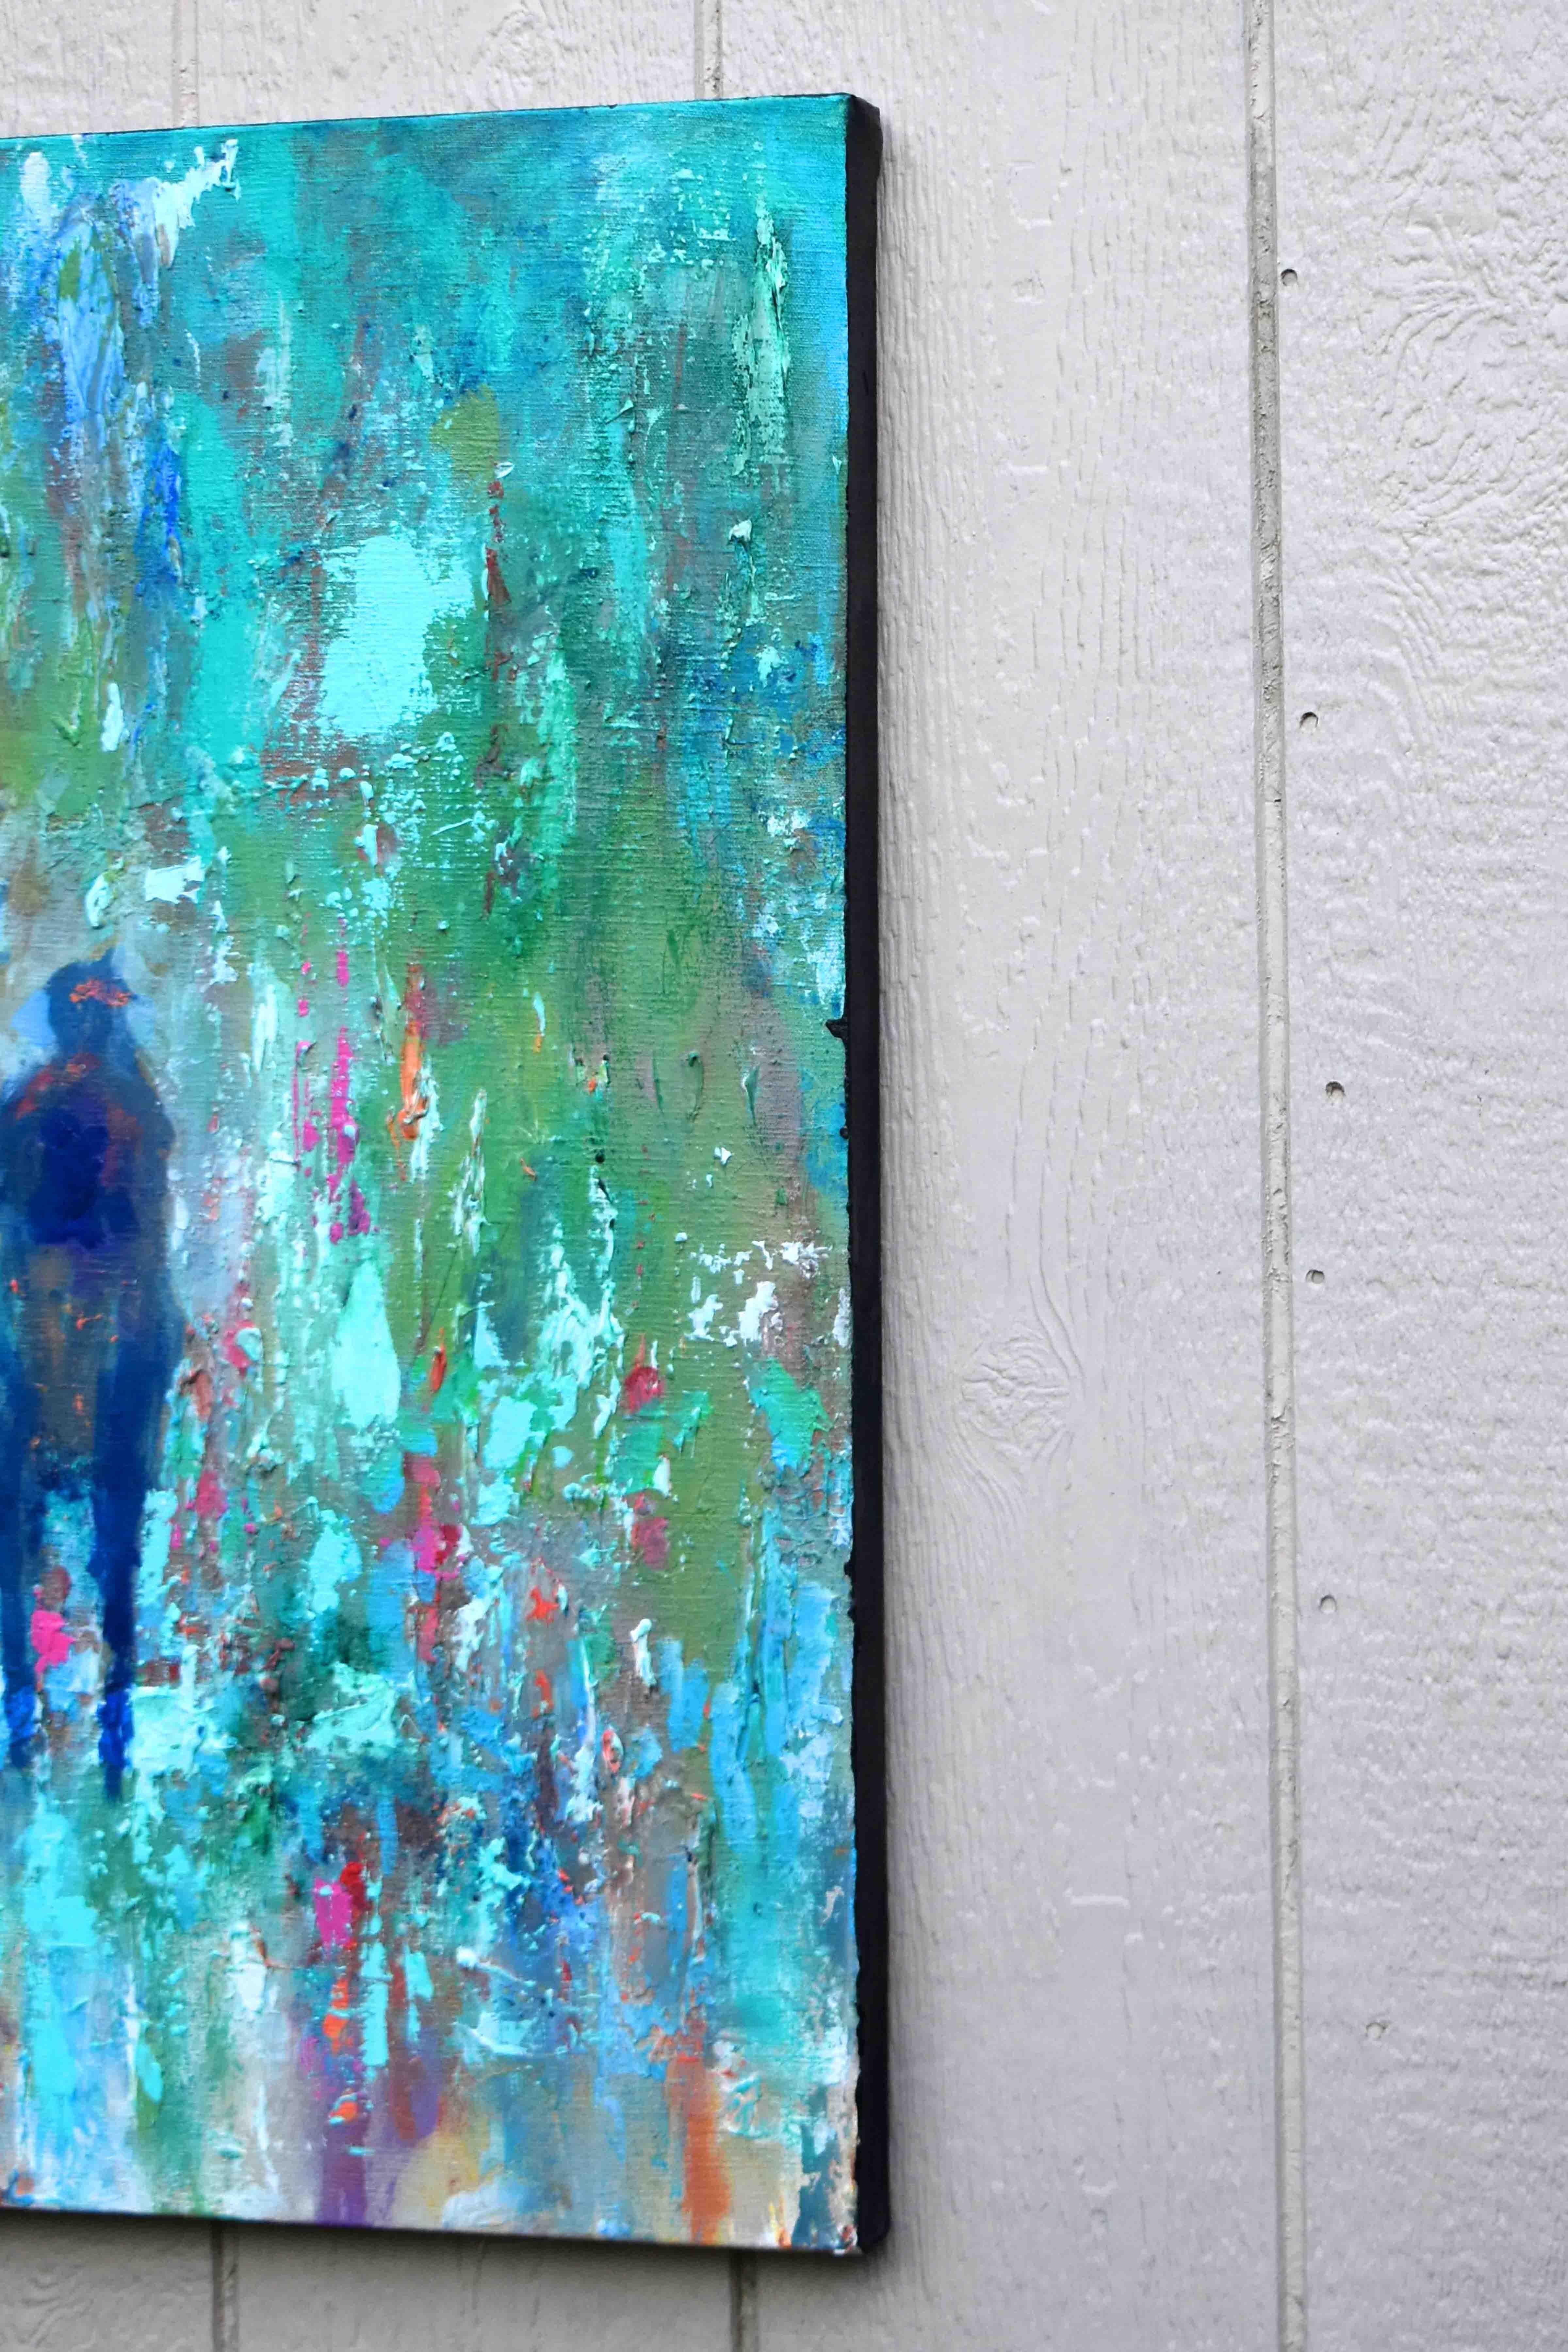 A Meeting of Minds #3, Original Painting - Expressionist Art by Kip Decker